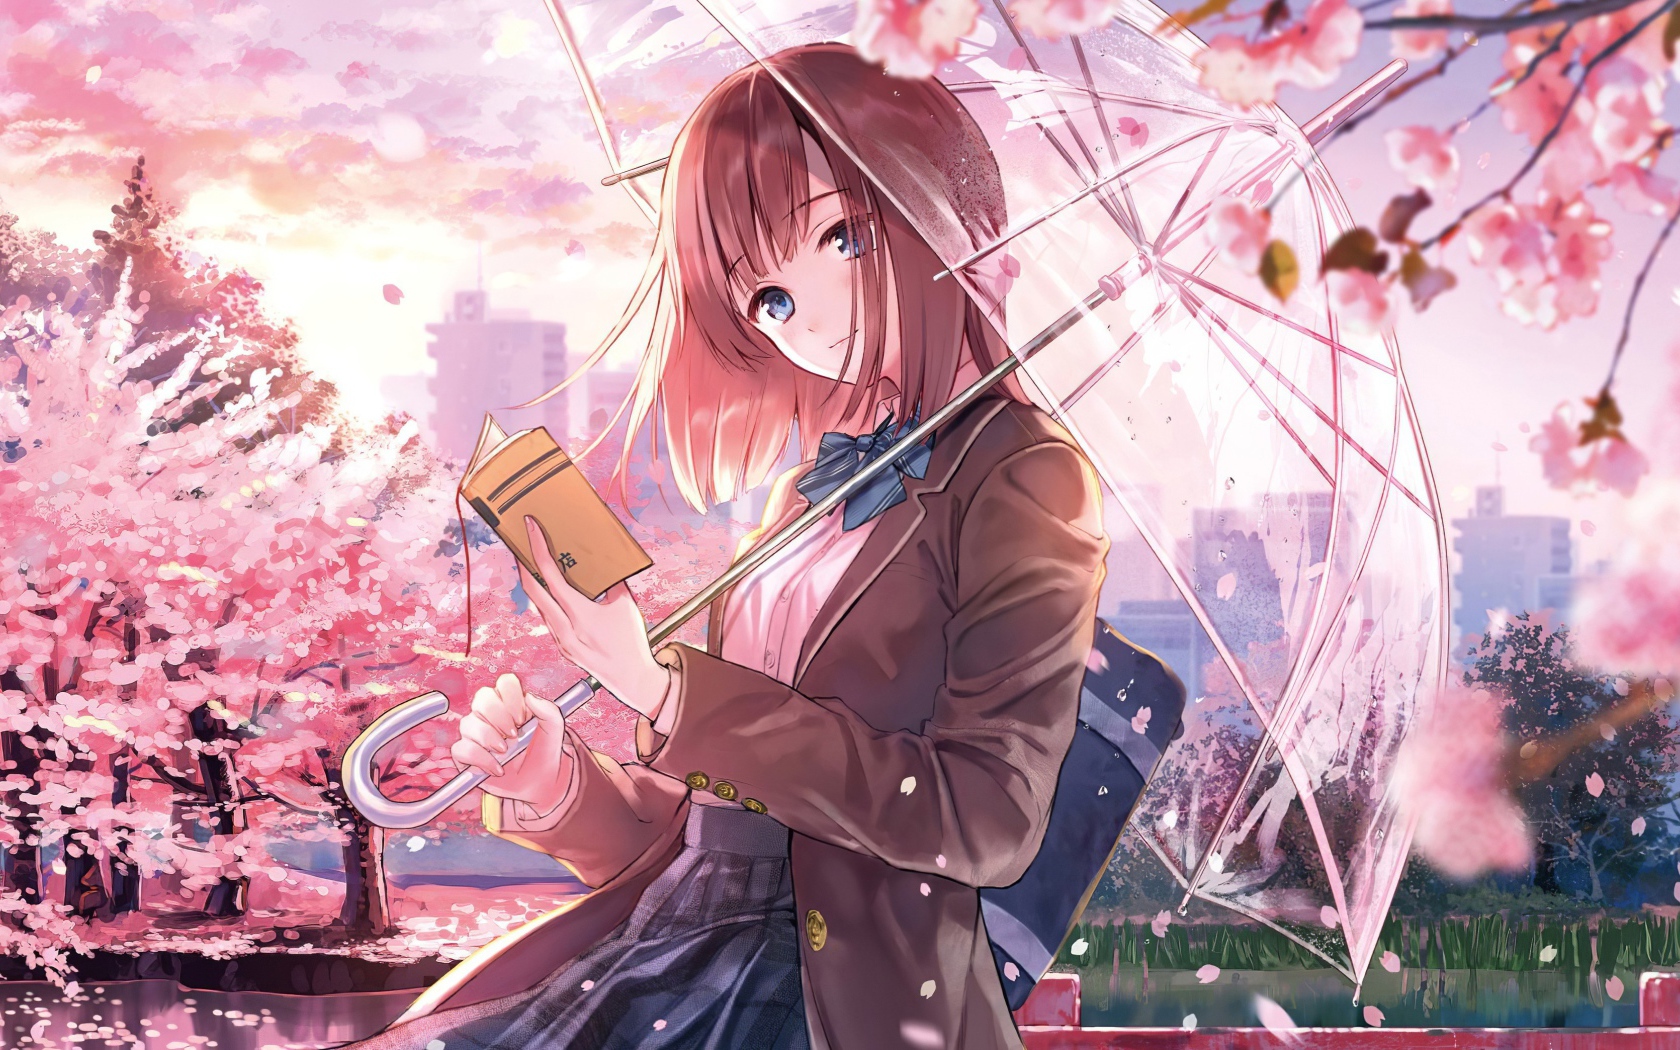 Anime girl with a book and an umbrella in hand